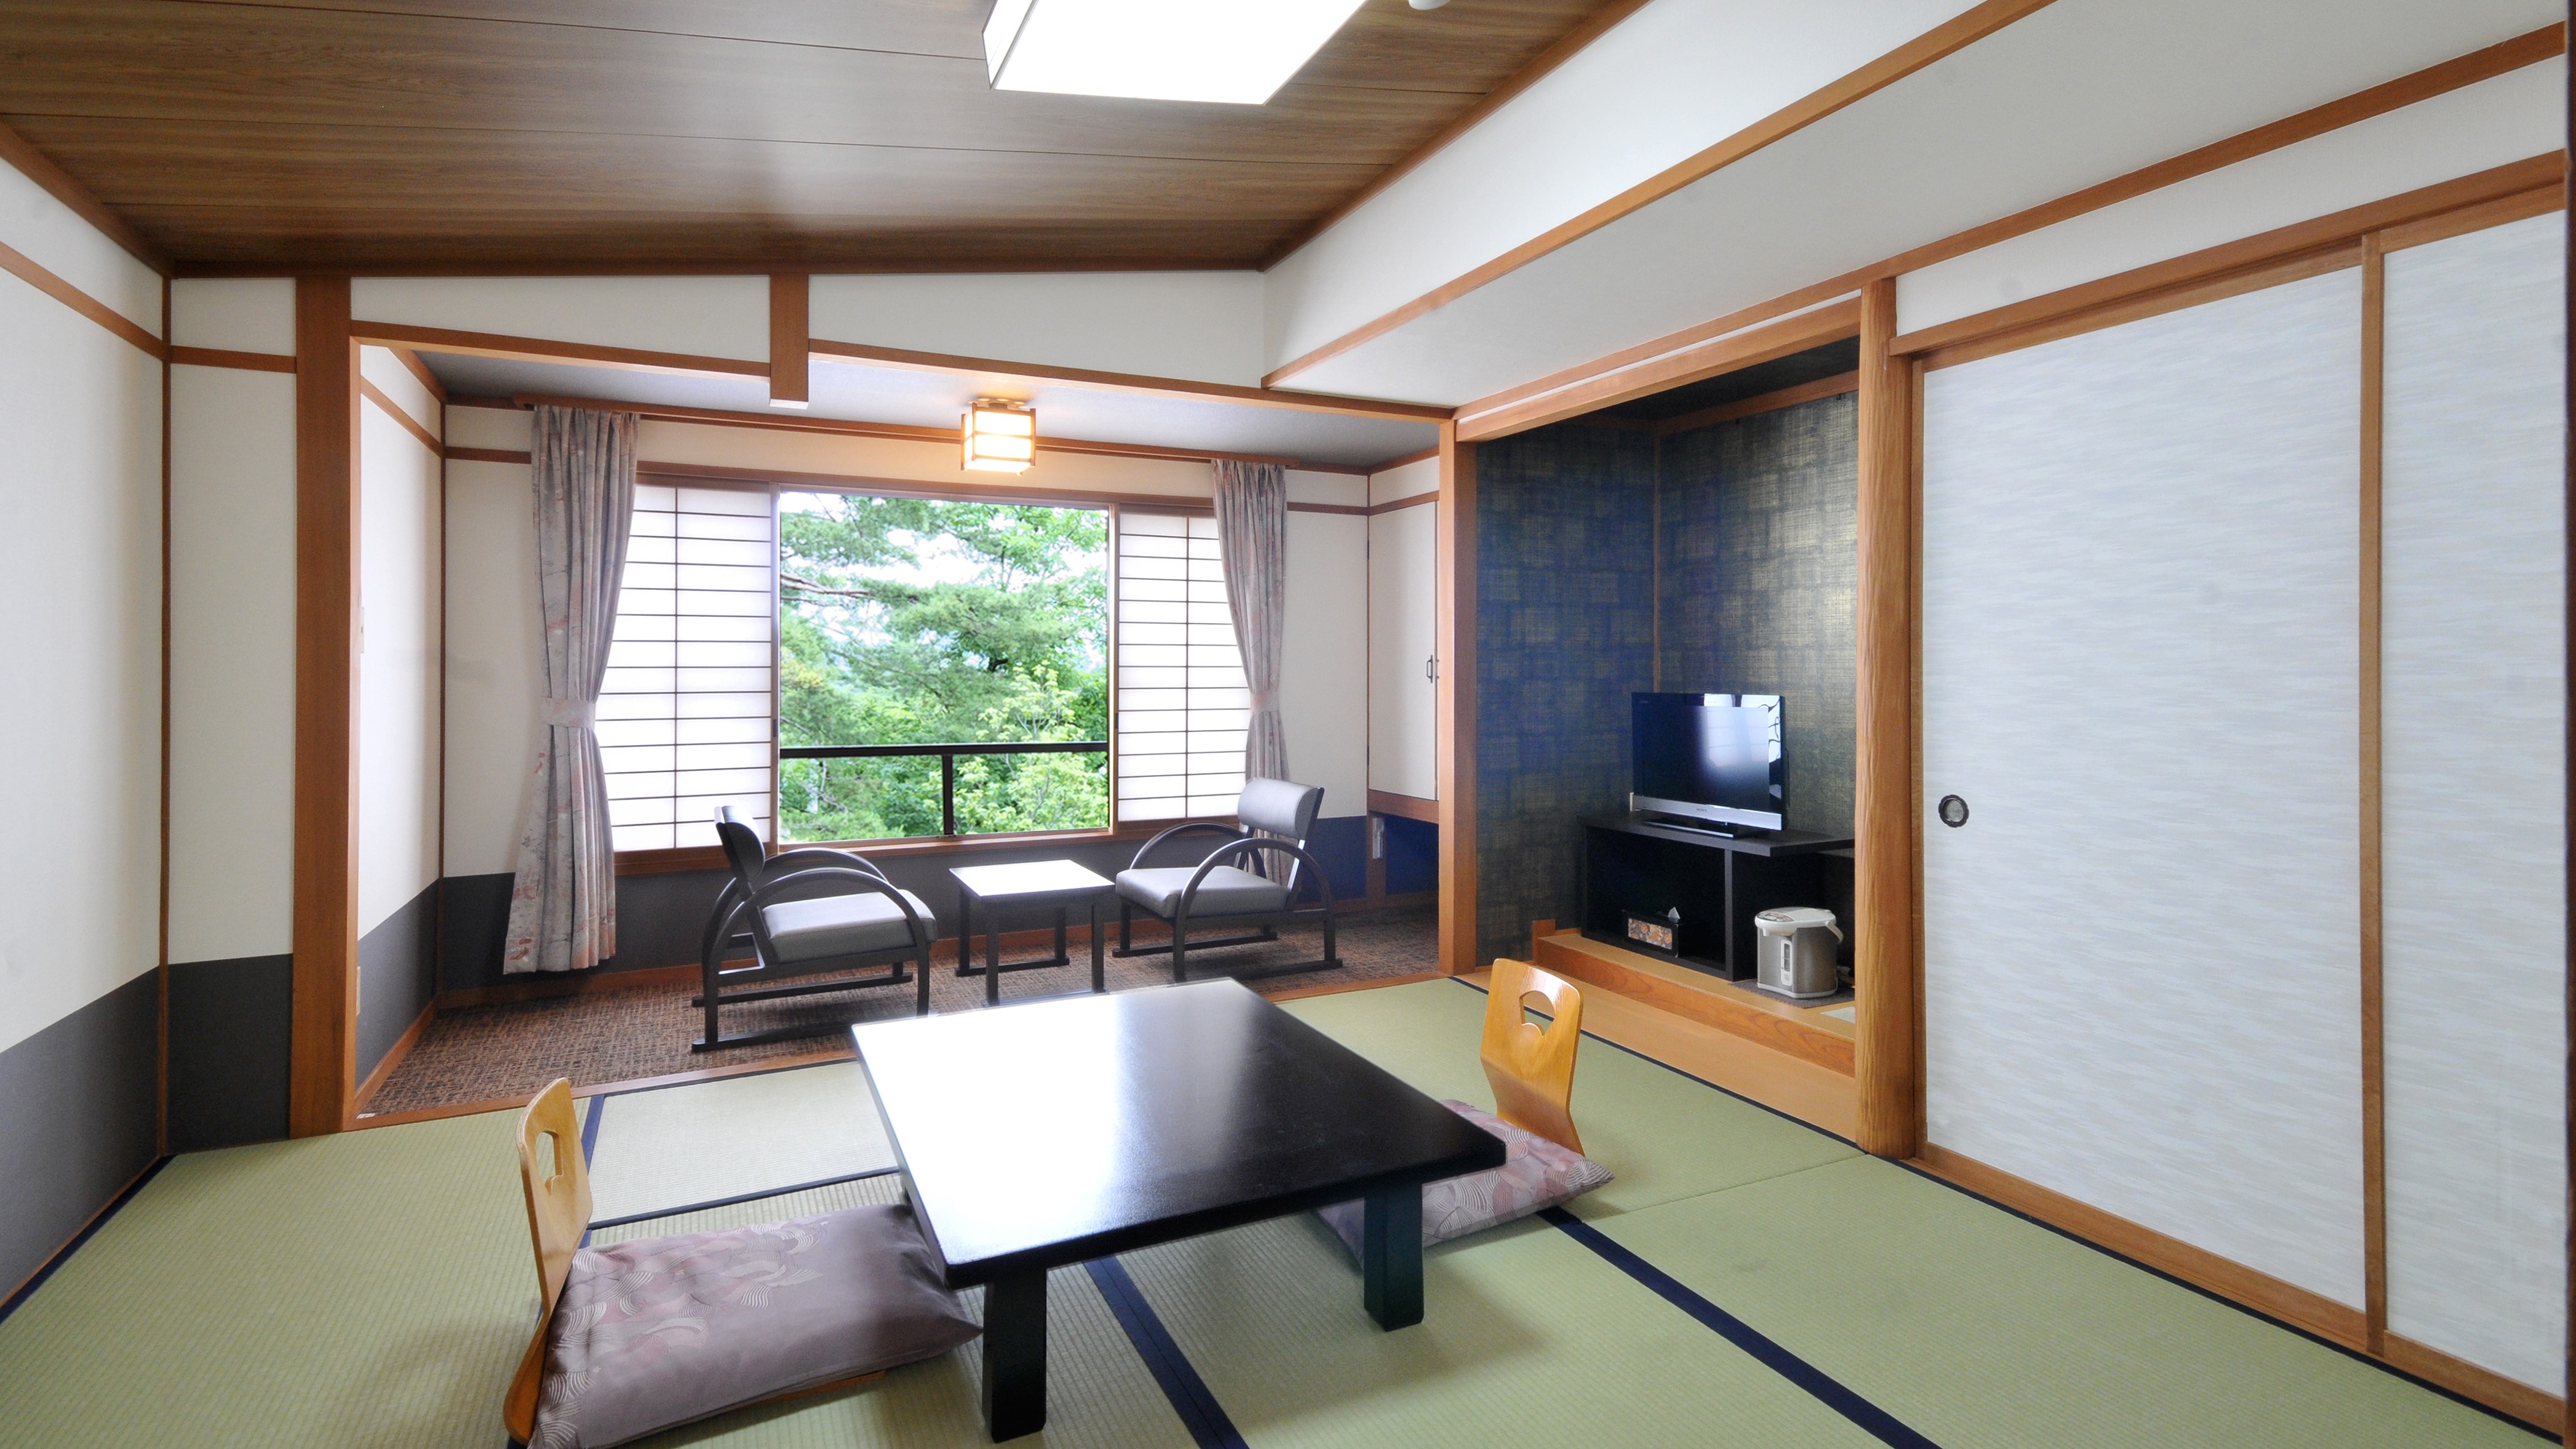 Japanese-style room 8 tatami mats * All rooms are non-smoking * Bath and toilet included